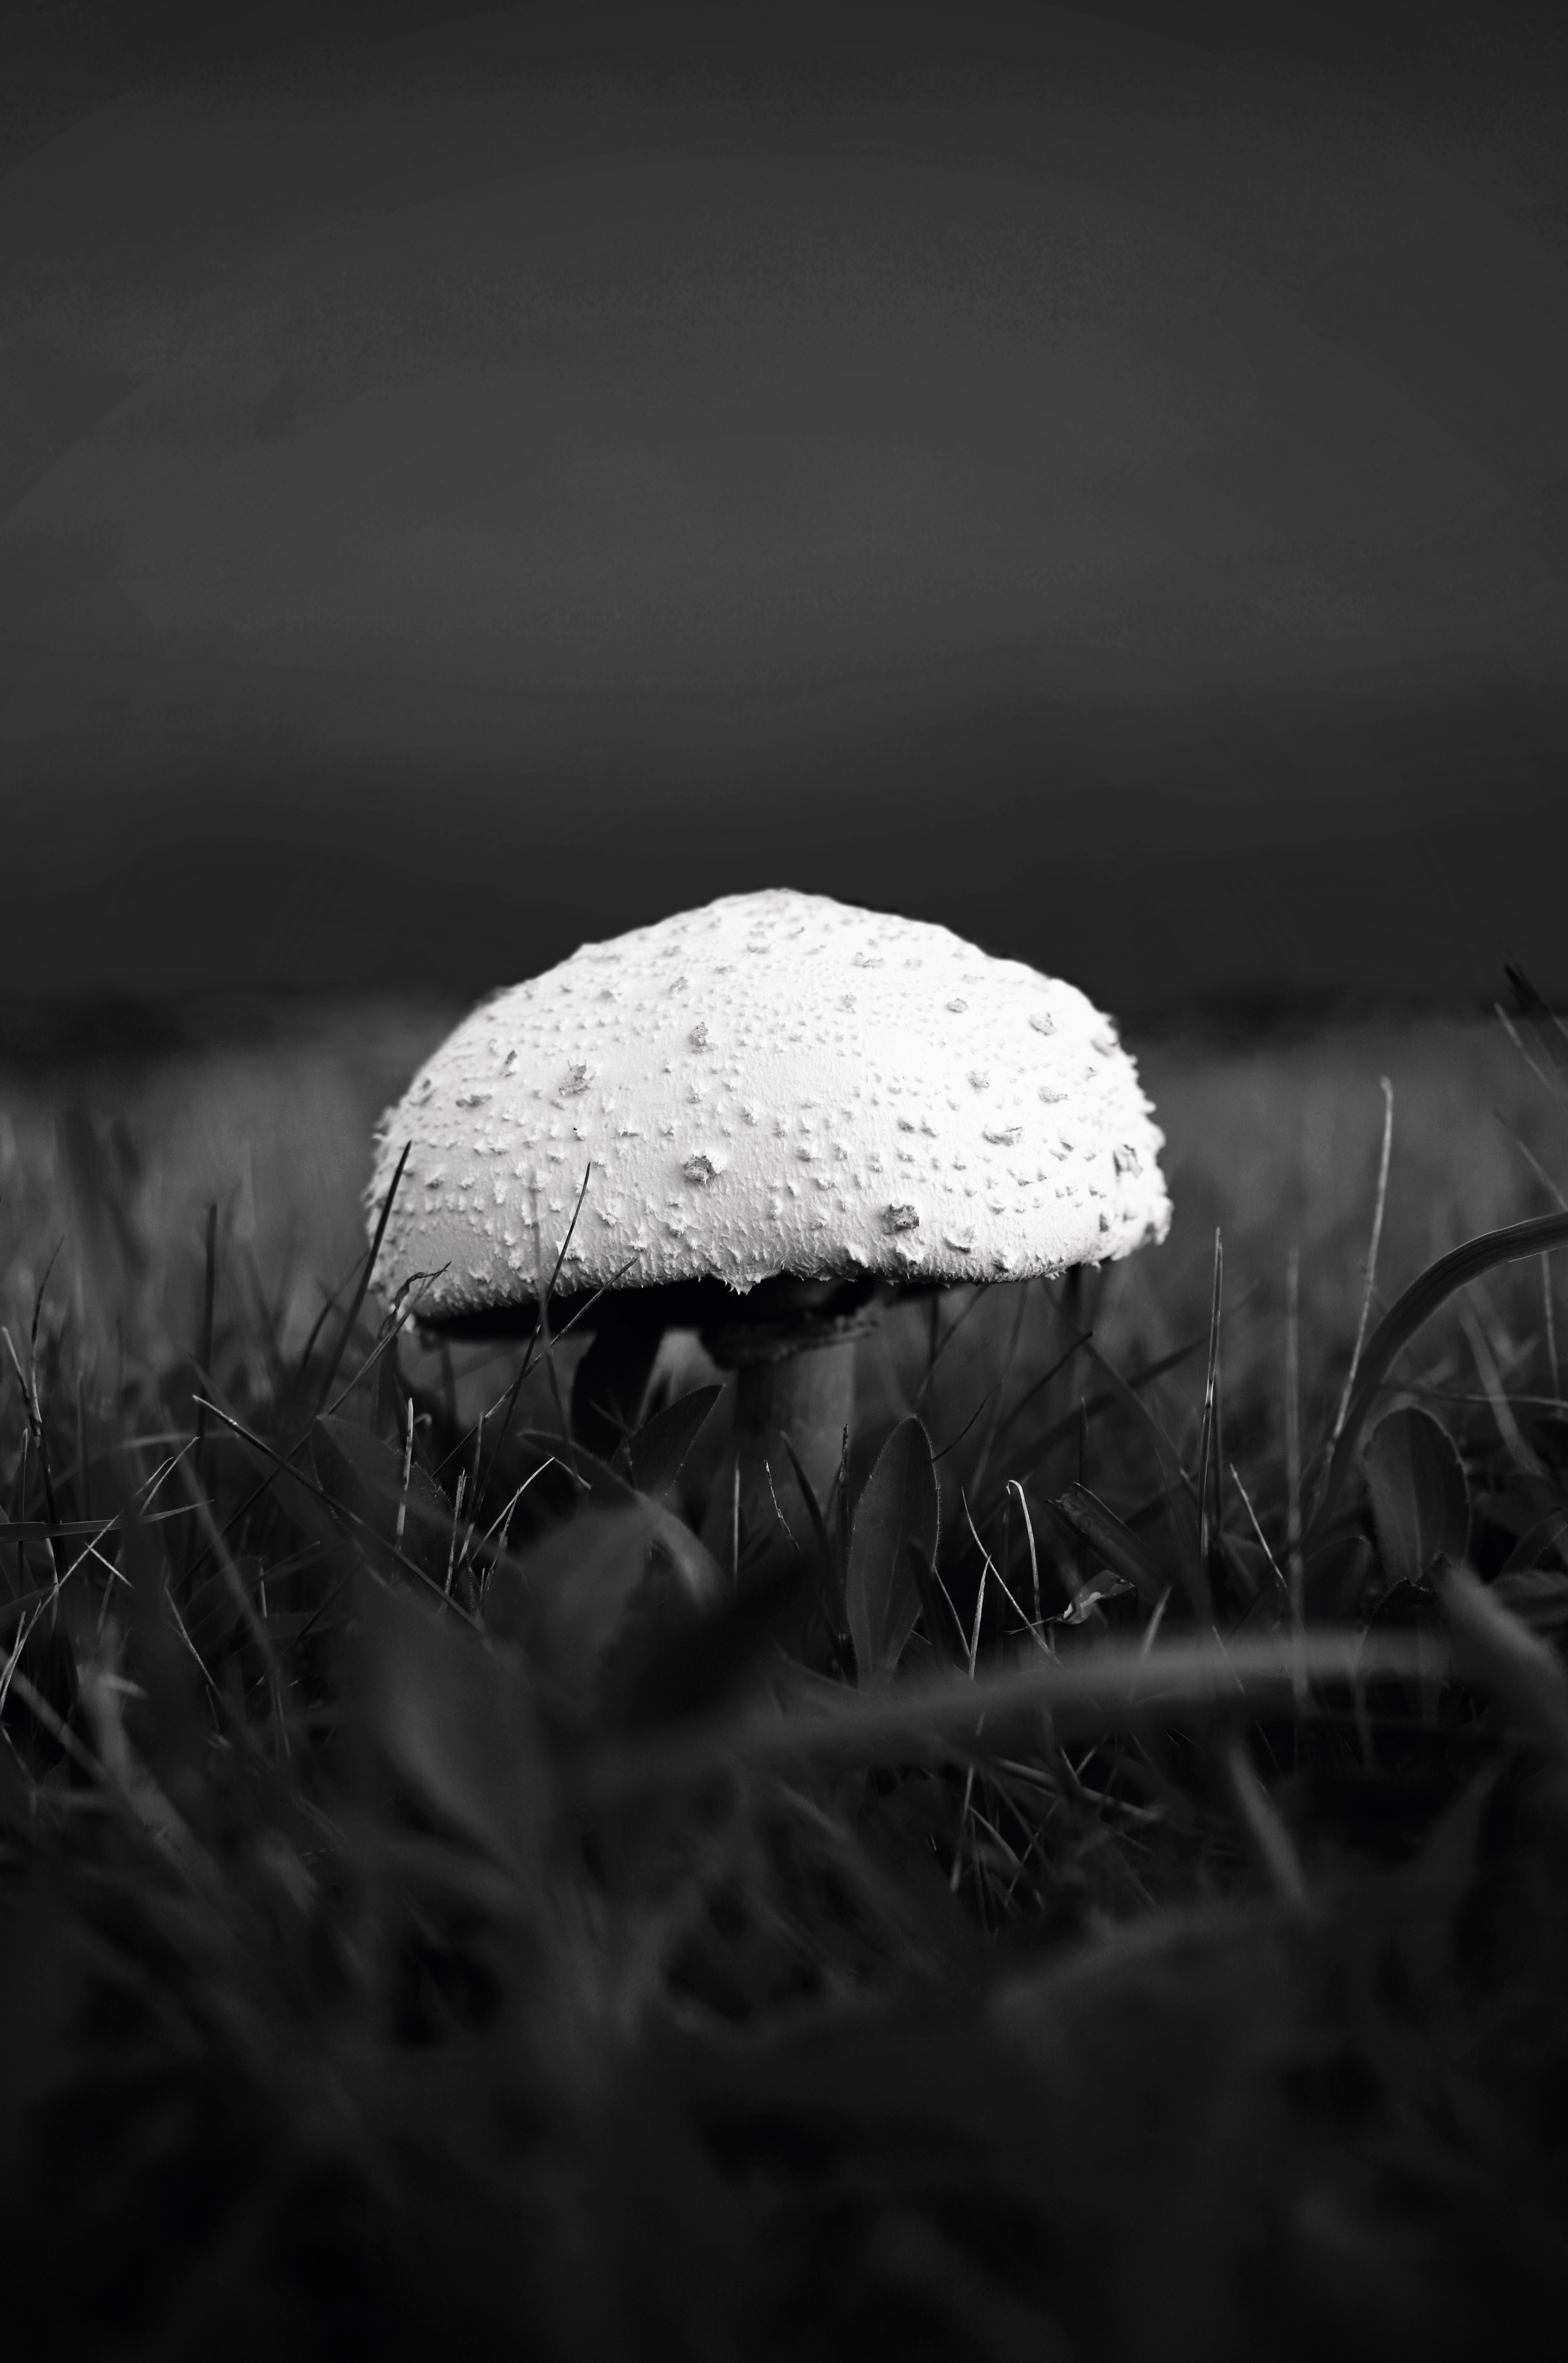 A white mushroom stands out against a black background of grass and sky.